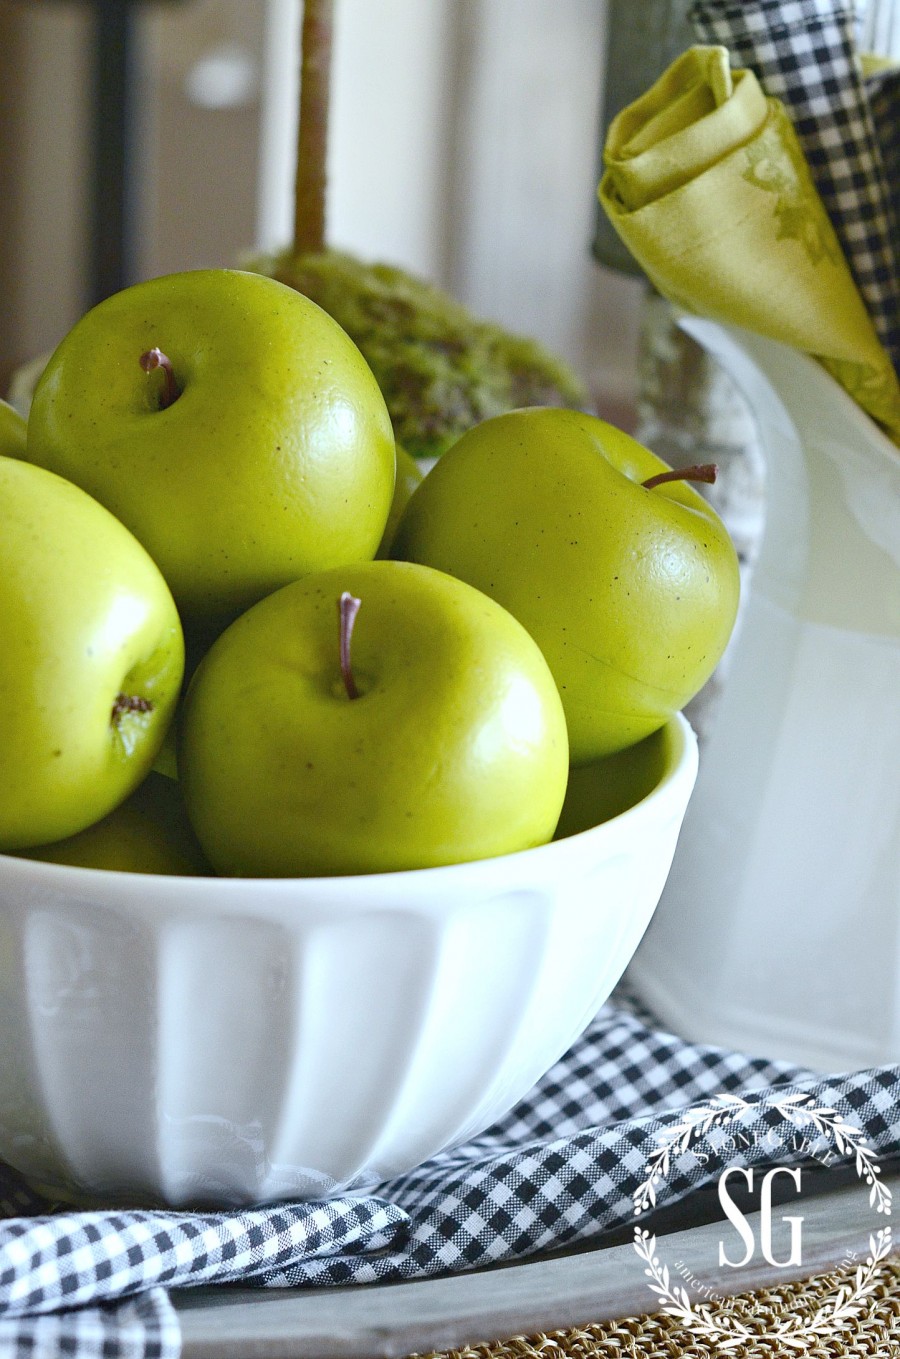 EARLY FALL AND GREEN APPLES- The perfect kitchen table display for early fall. So simple to make-stonegableblog.com